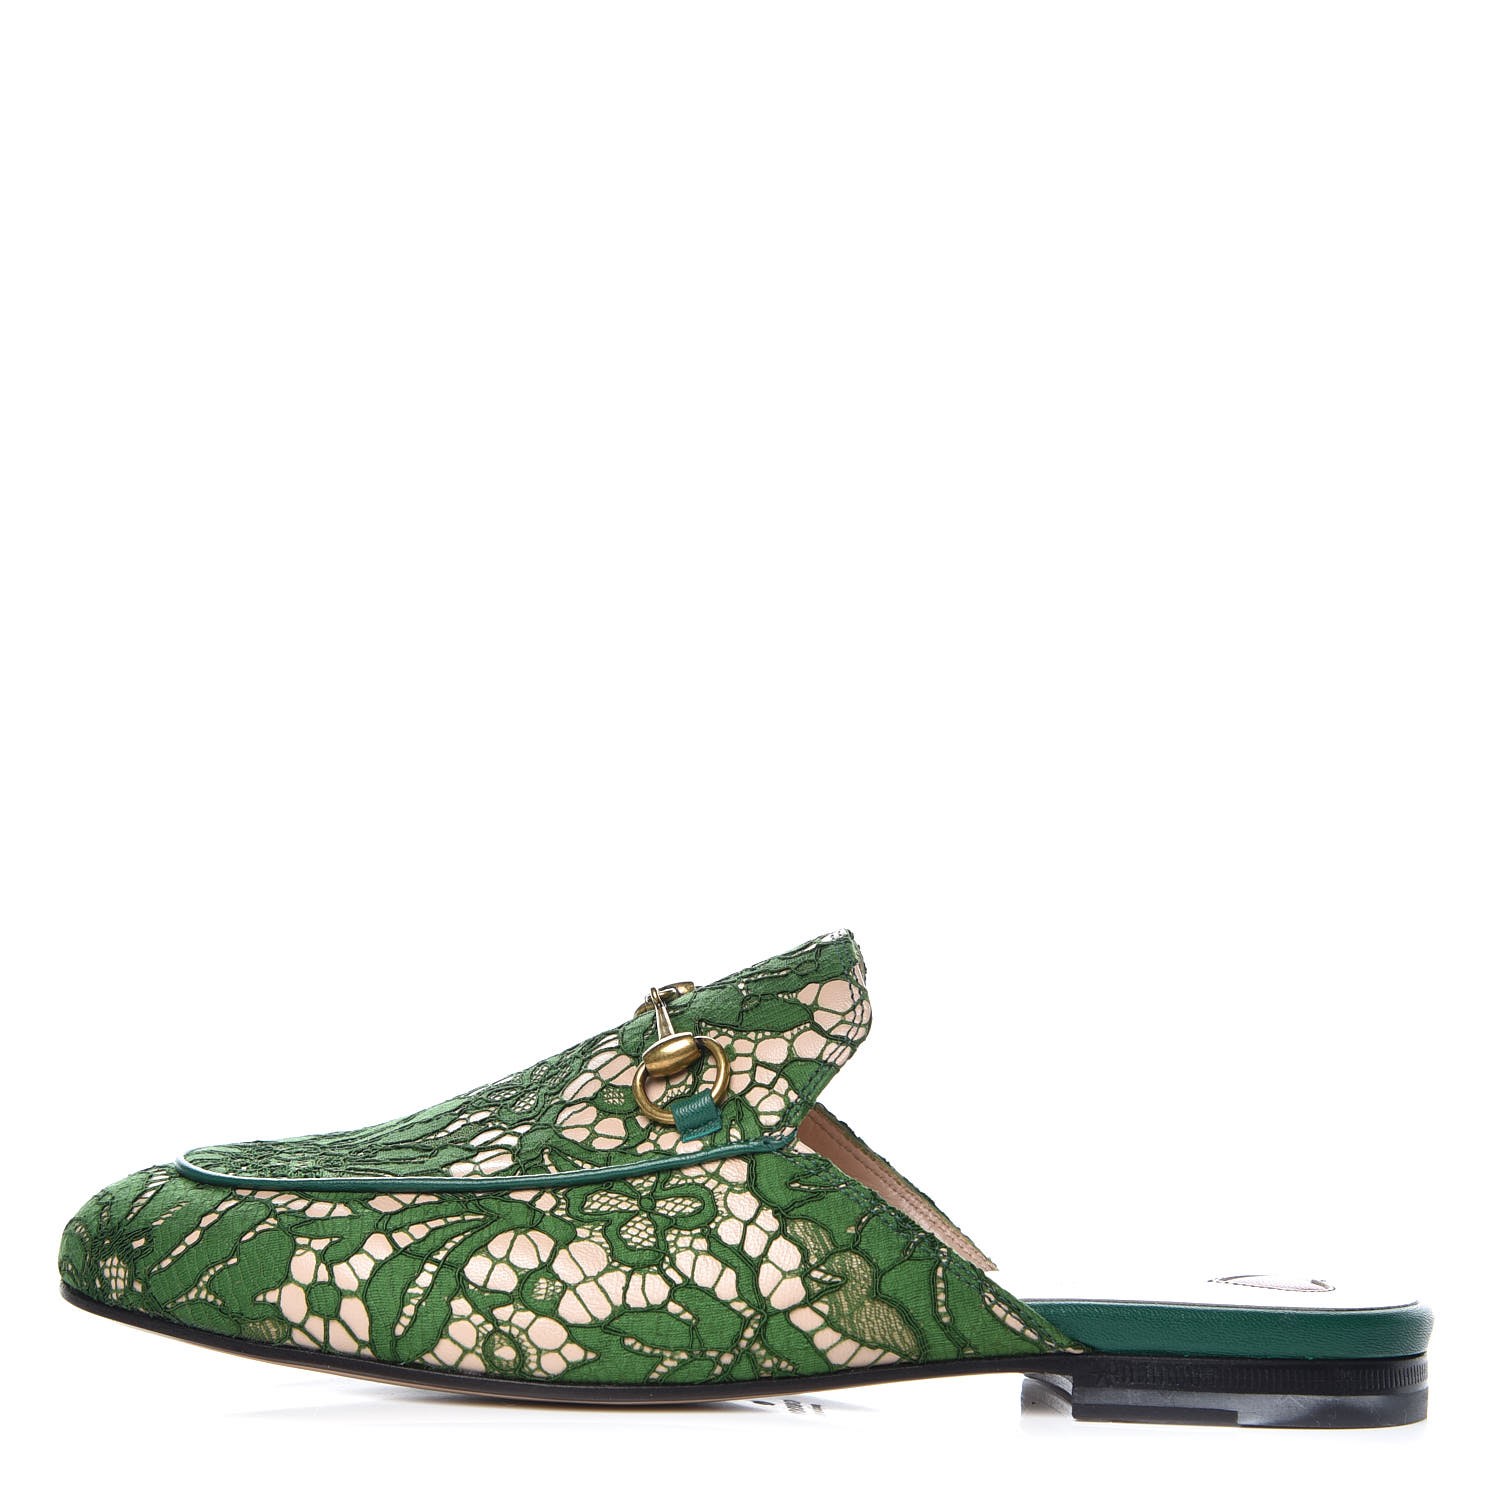 Lace Princetown Mules 38 Green 351994